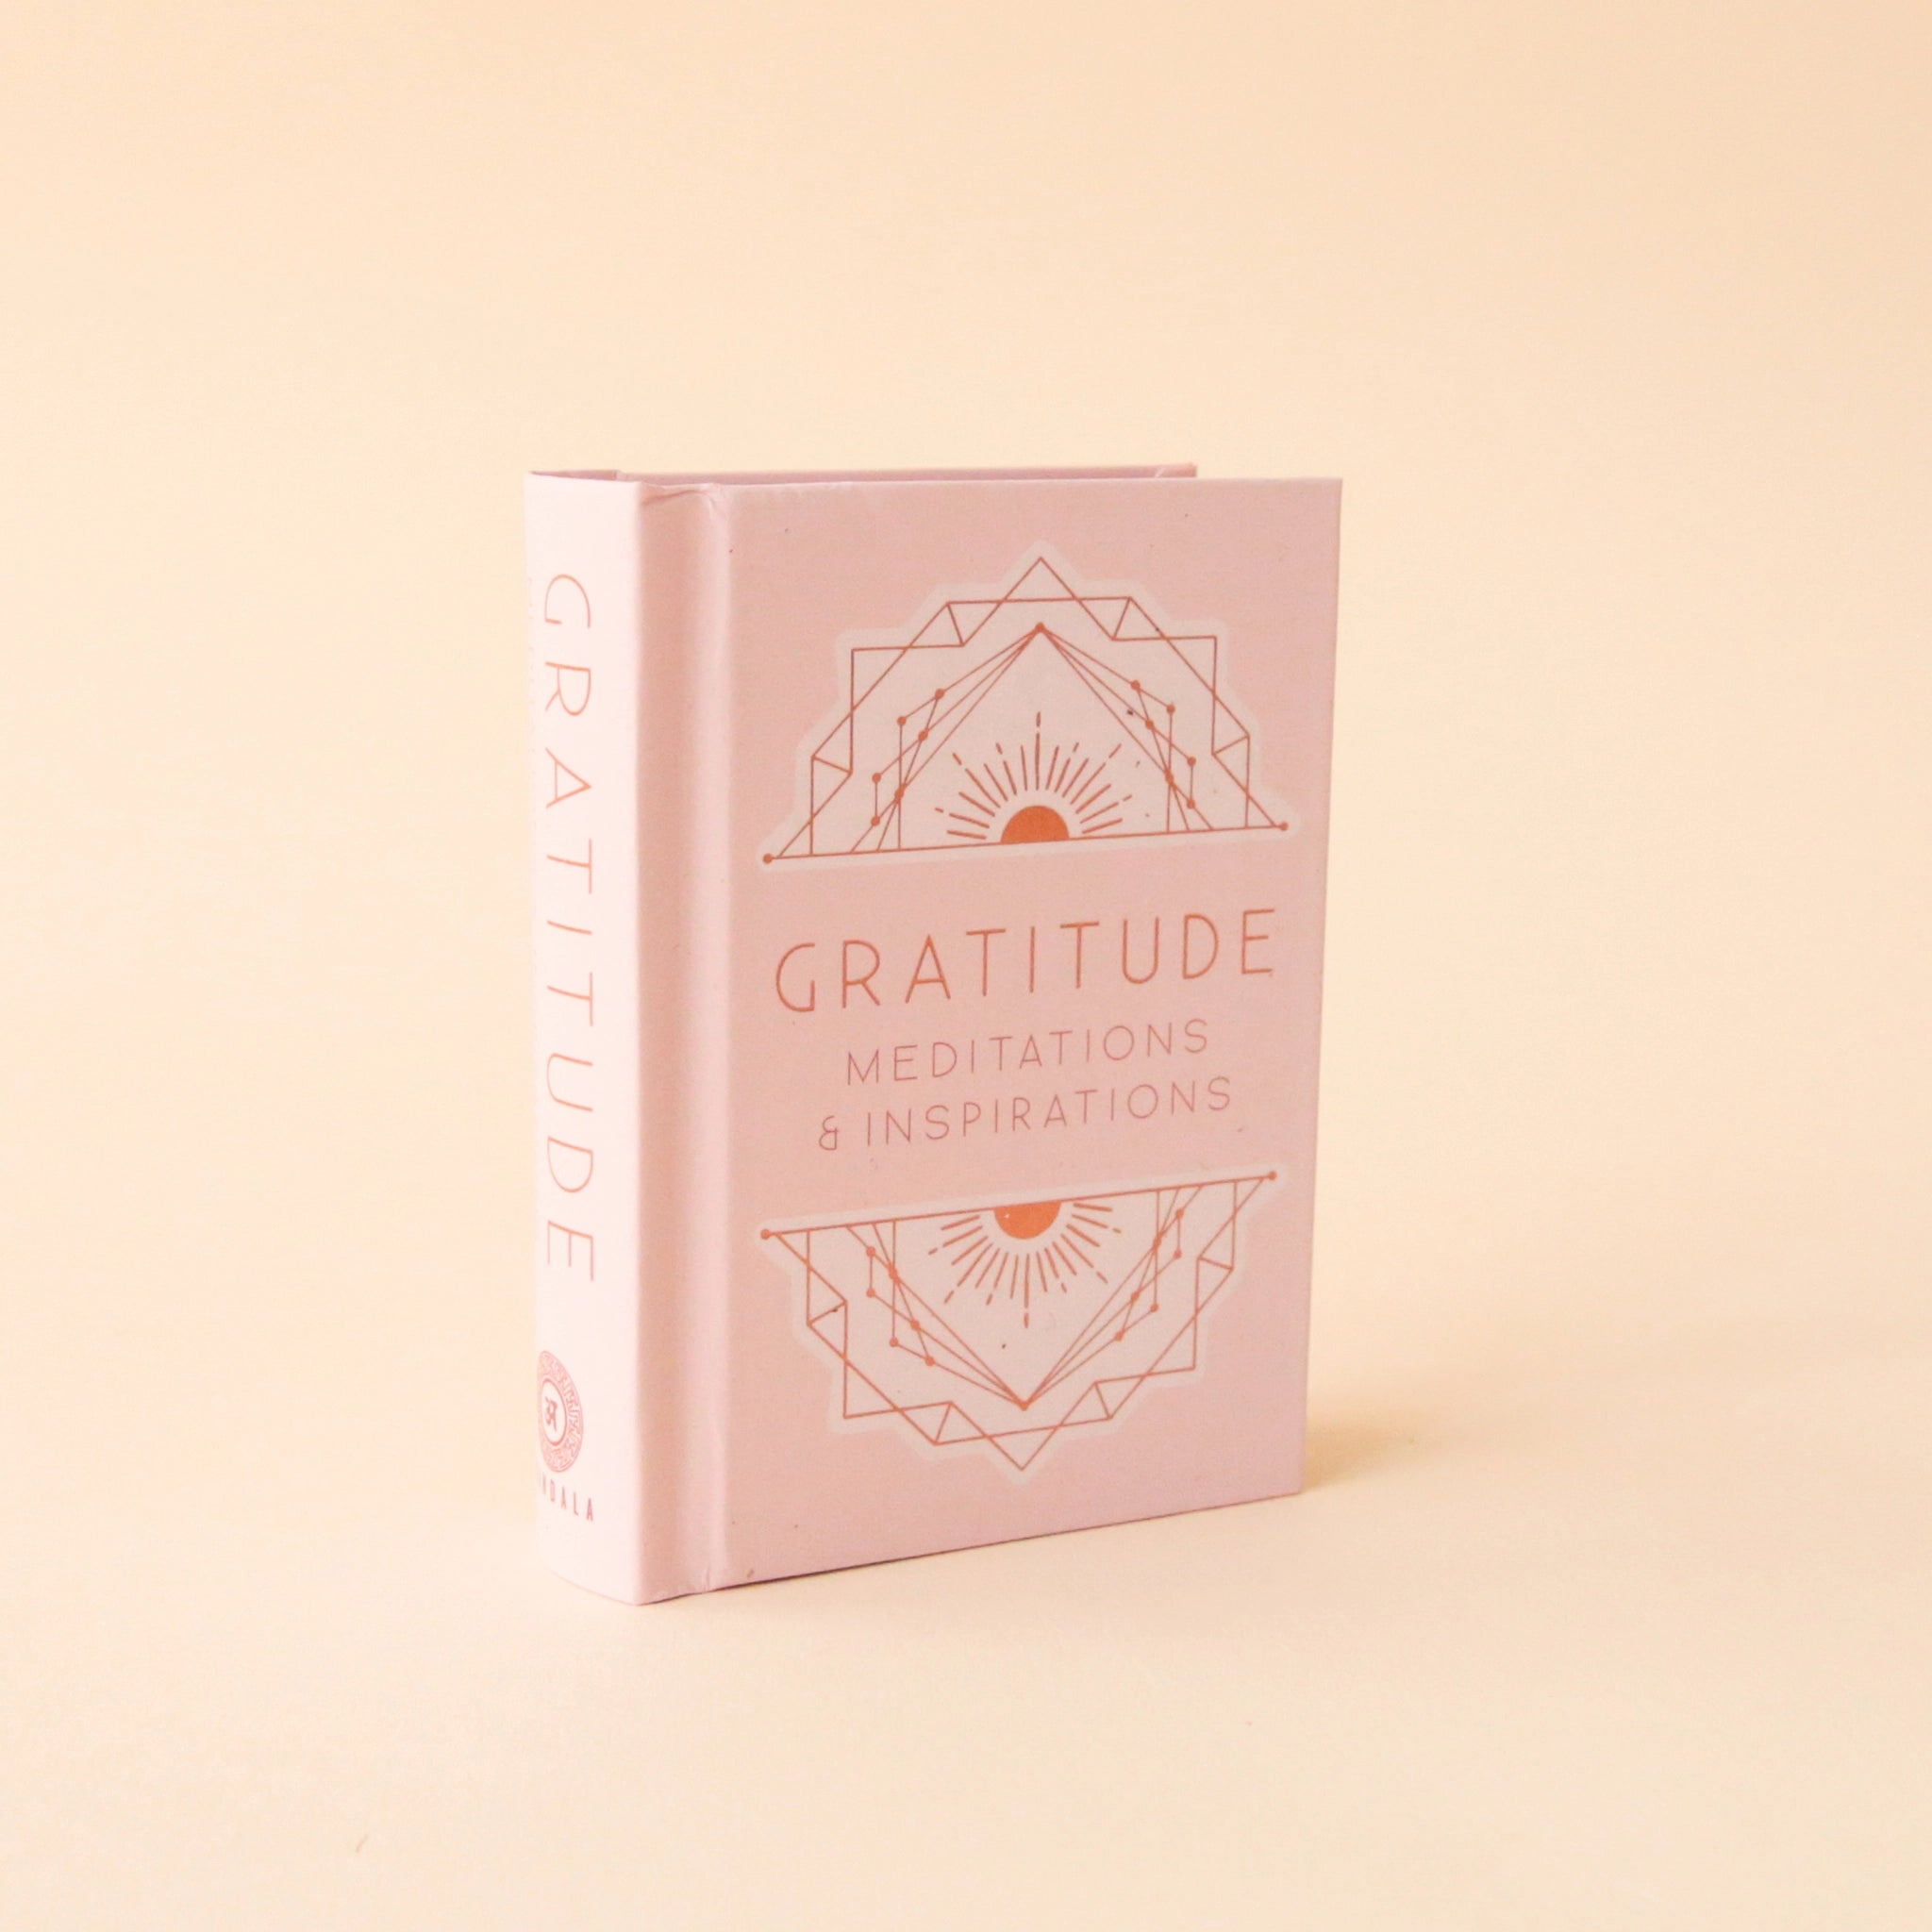 A small pink book that says, "Gratitude Meditations & Inspirations" in light pink on the front cover as well as s geometric illustration above and below the text.